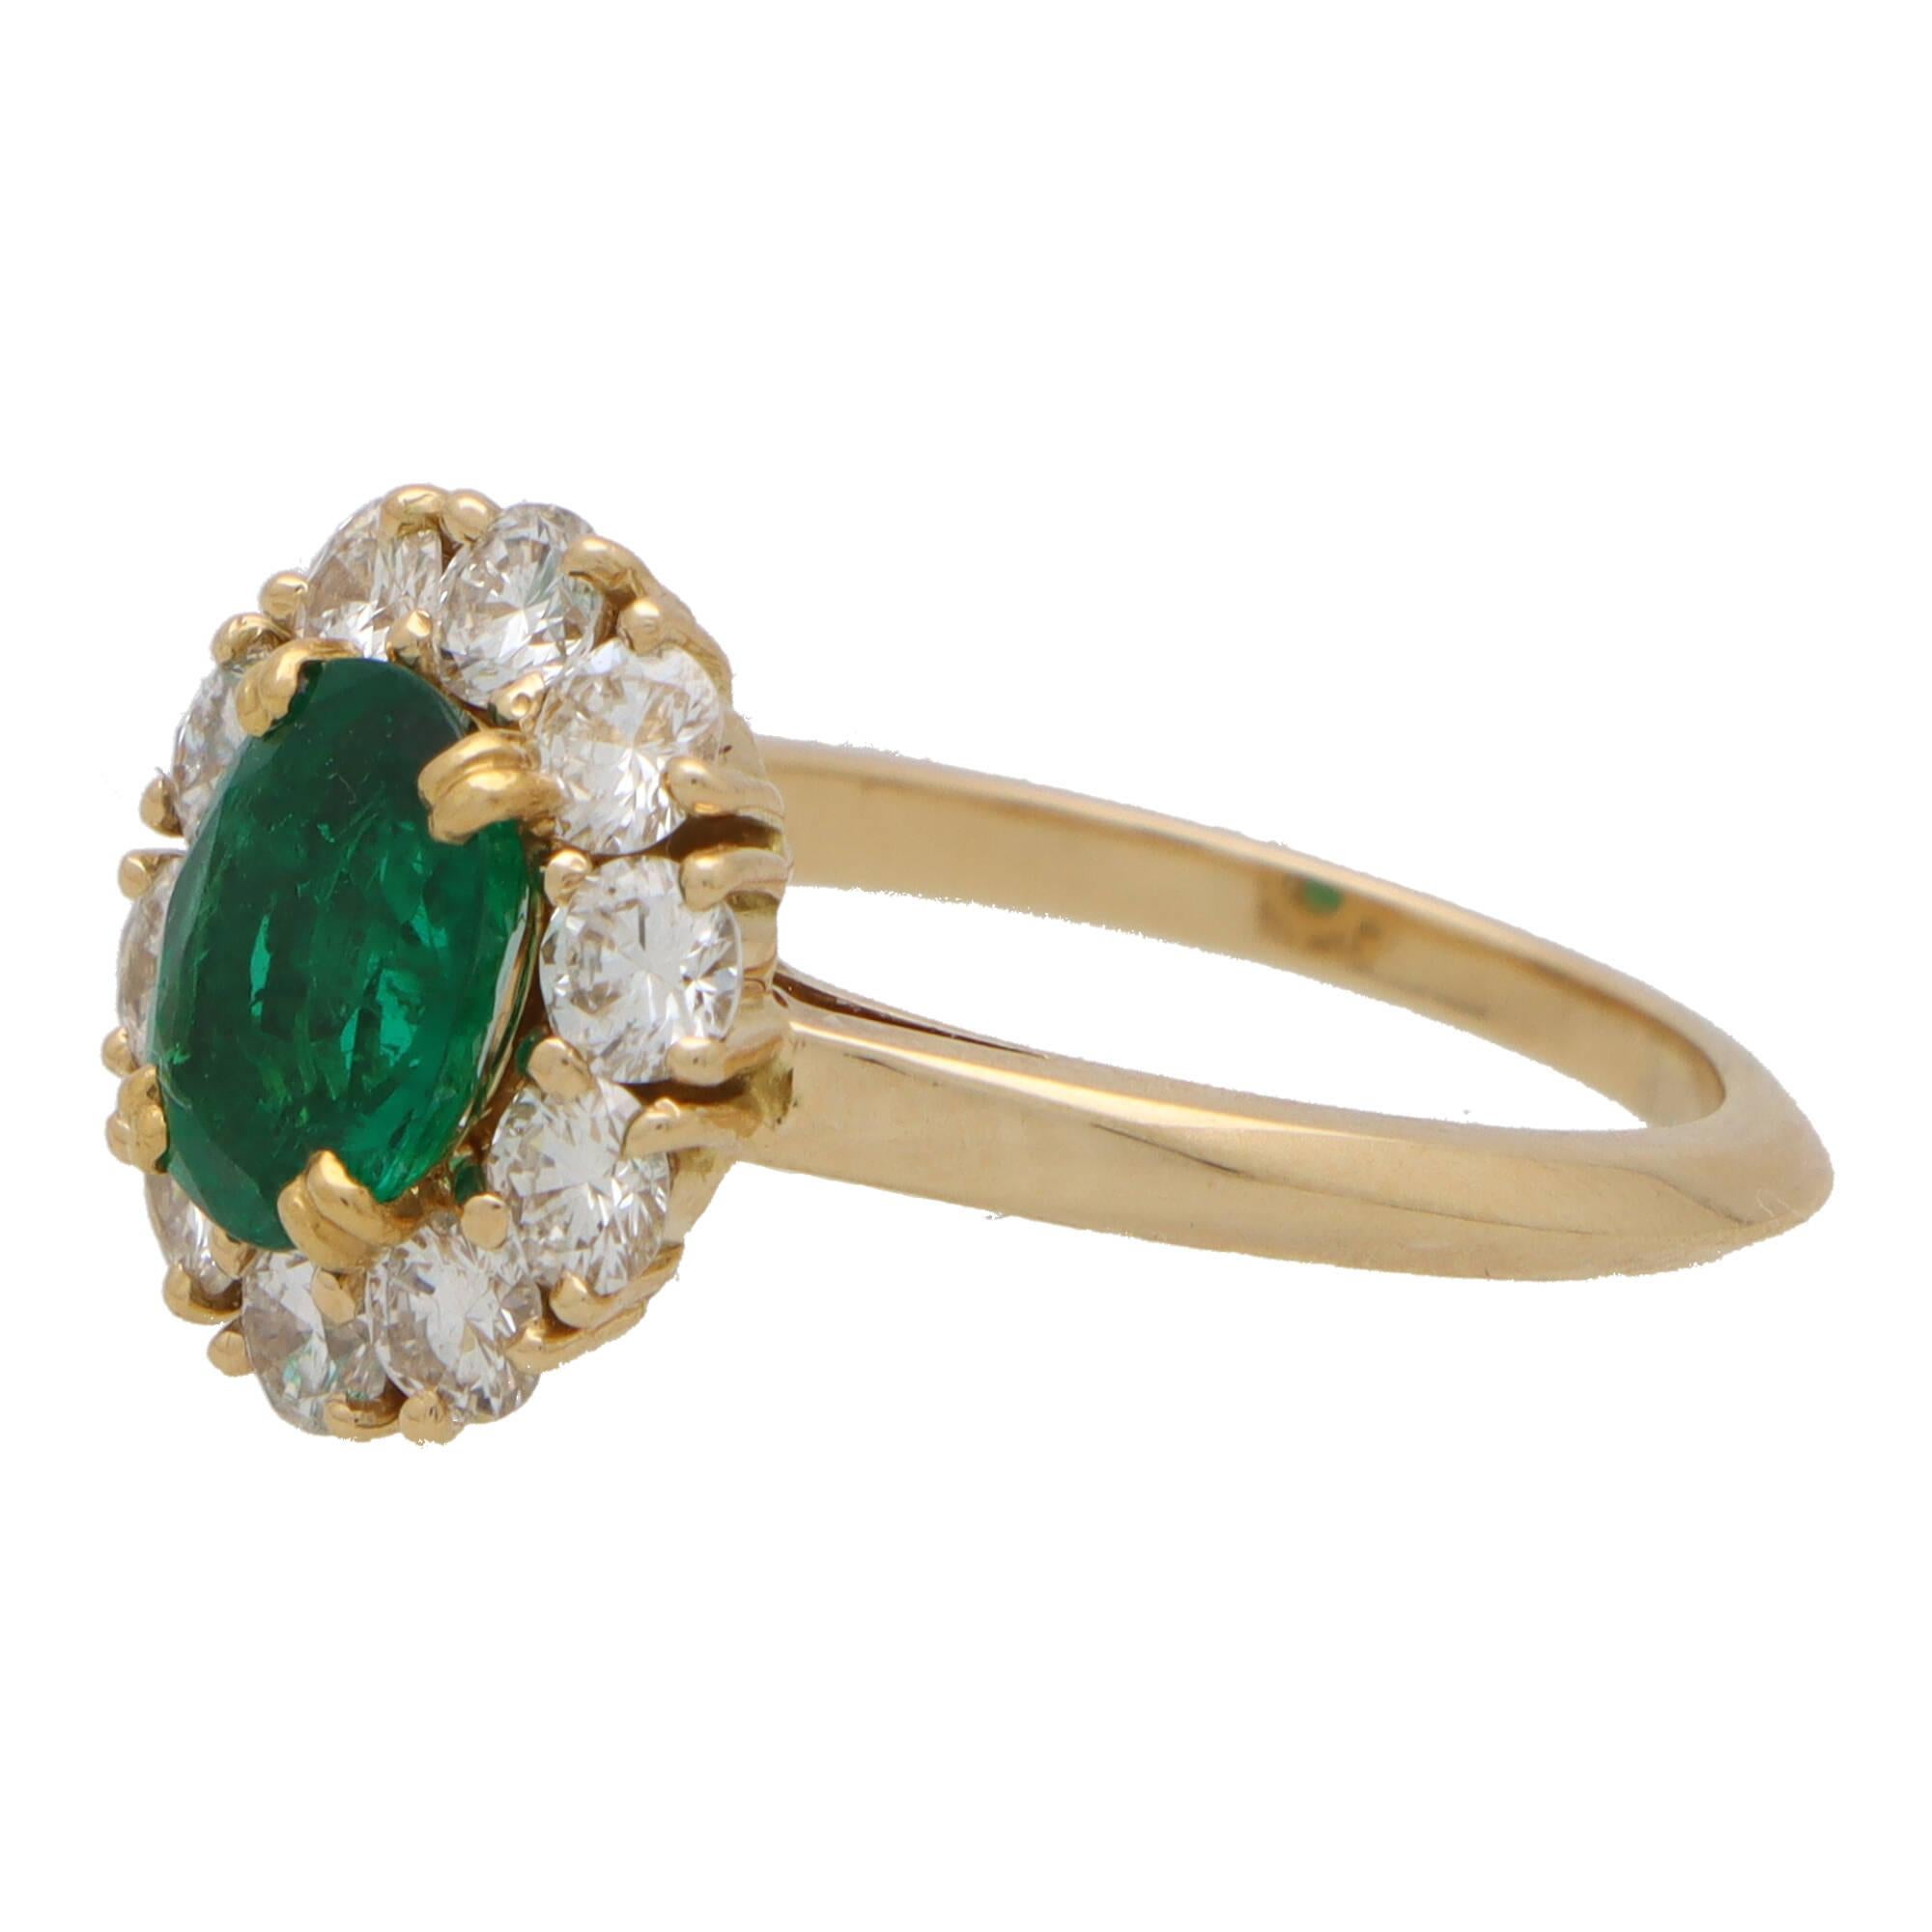 Oval Cut Vintage Mauboussin Emerald and Diamond Cluster Ring Set in 18k Yellow Gold